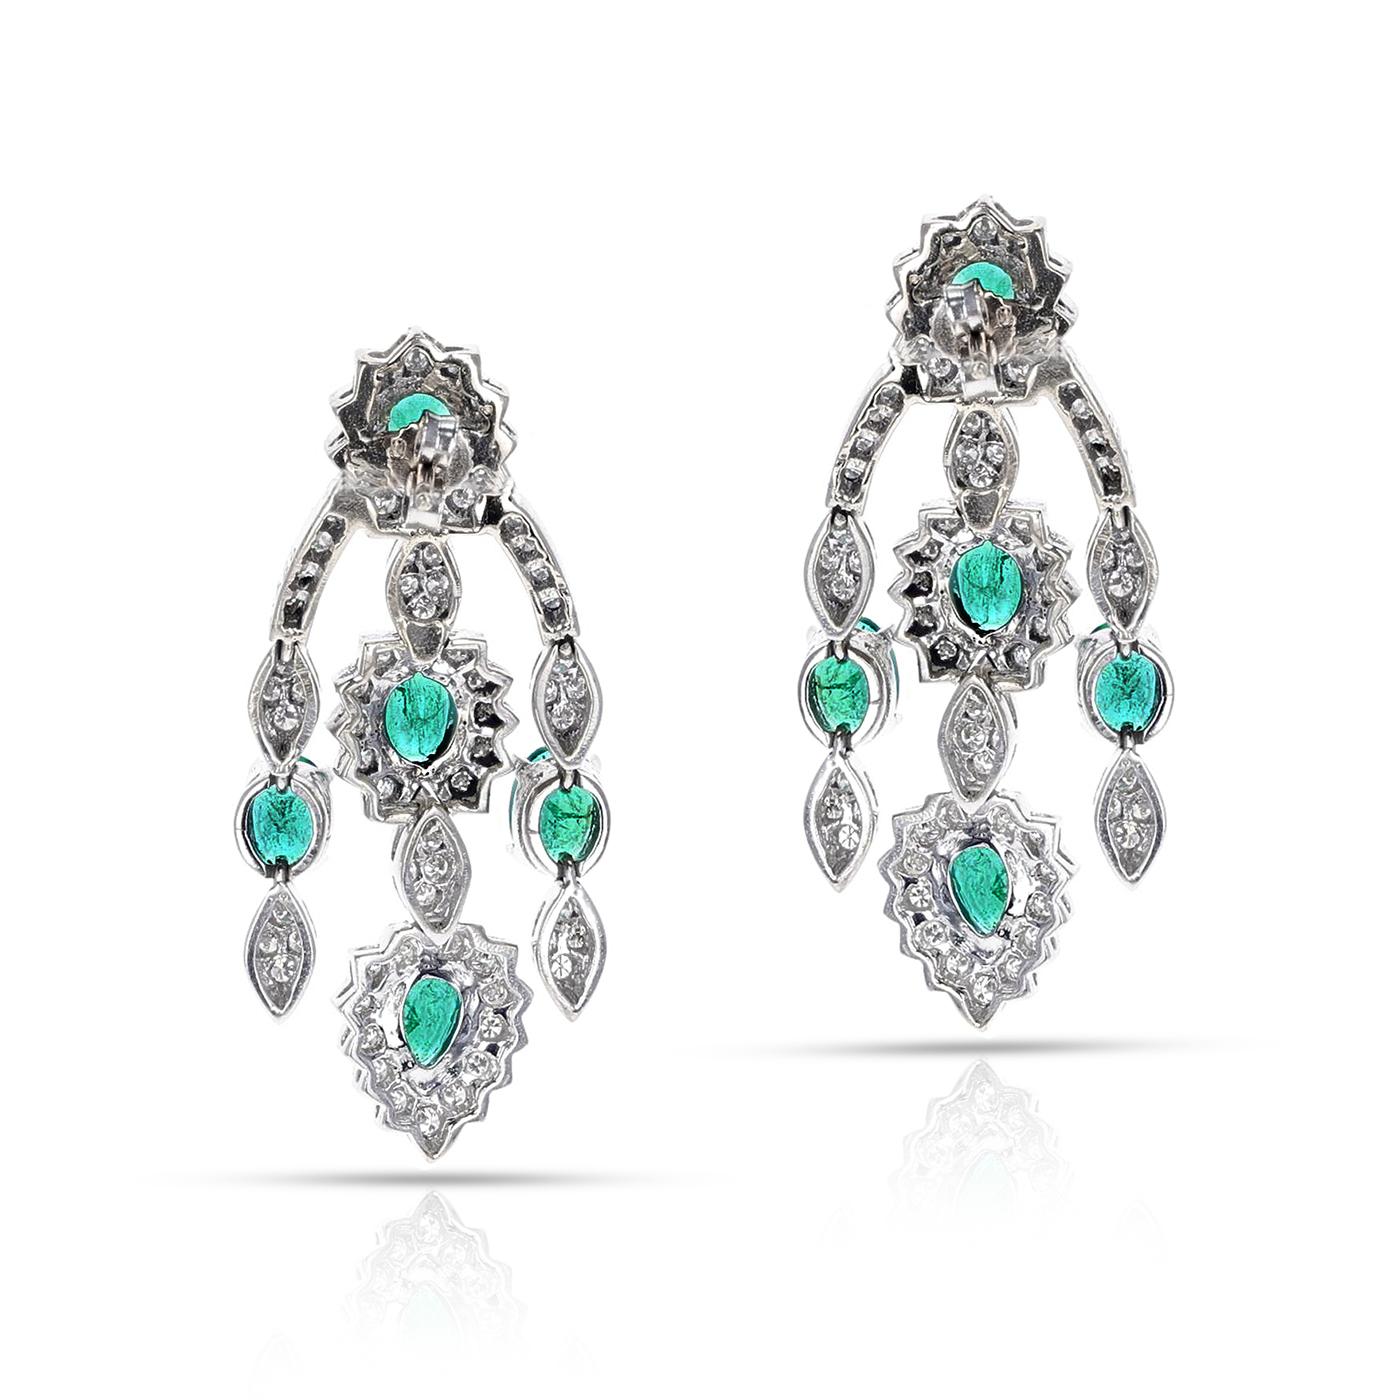 A stunning pair of Oval-Cut Emerald and Diamond Chandelier Dangle Earrings with French Marks. The earrings are made in 14 Karat White Gold. The total weight is 24.37 grams. The length is 1.85 inches and the width is 0.78 inches.